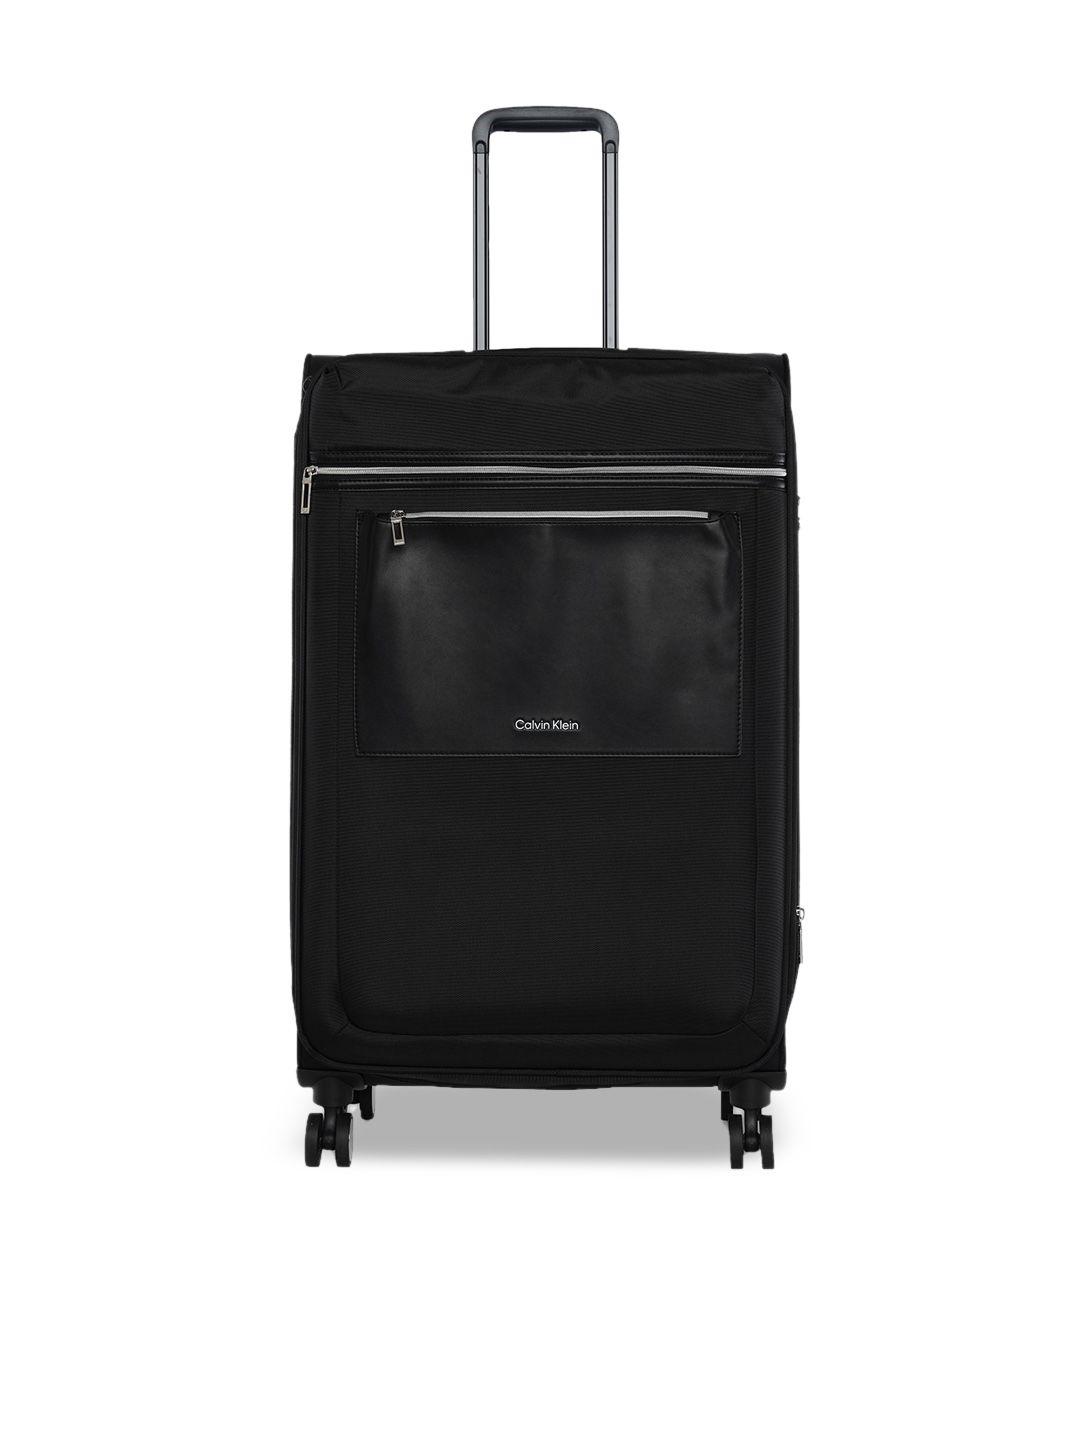 calvin klein union square range black solid soft-sided large trolley suitcase